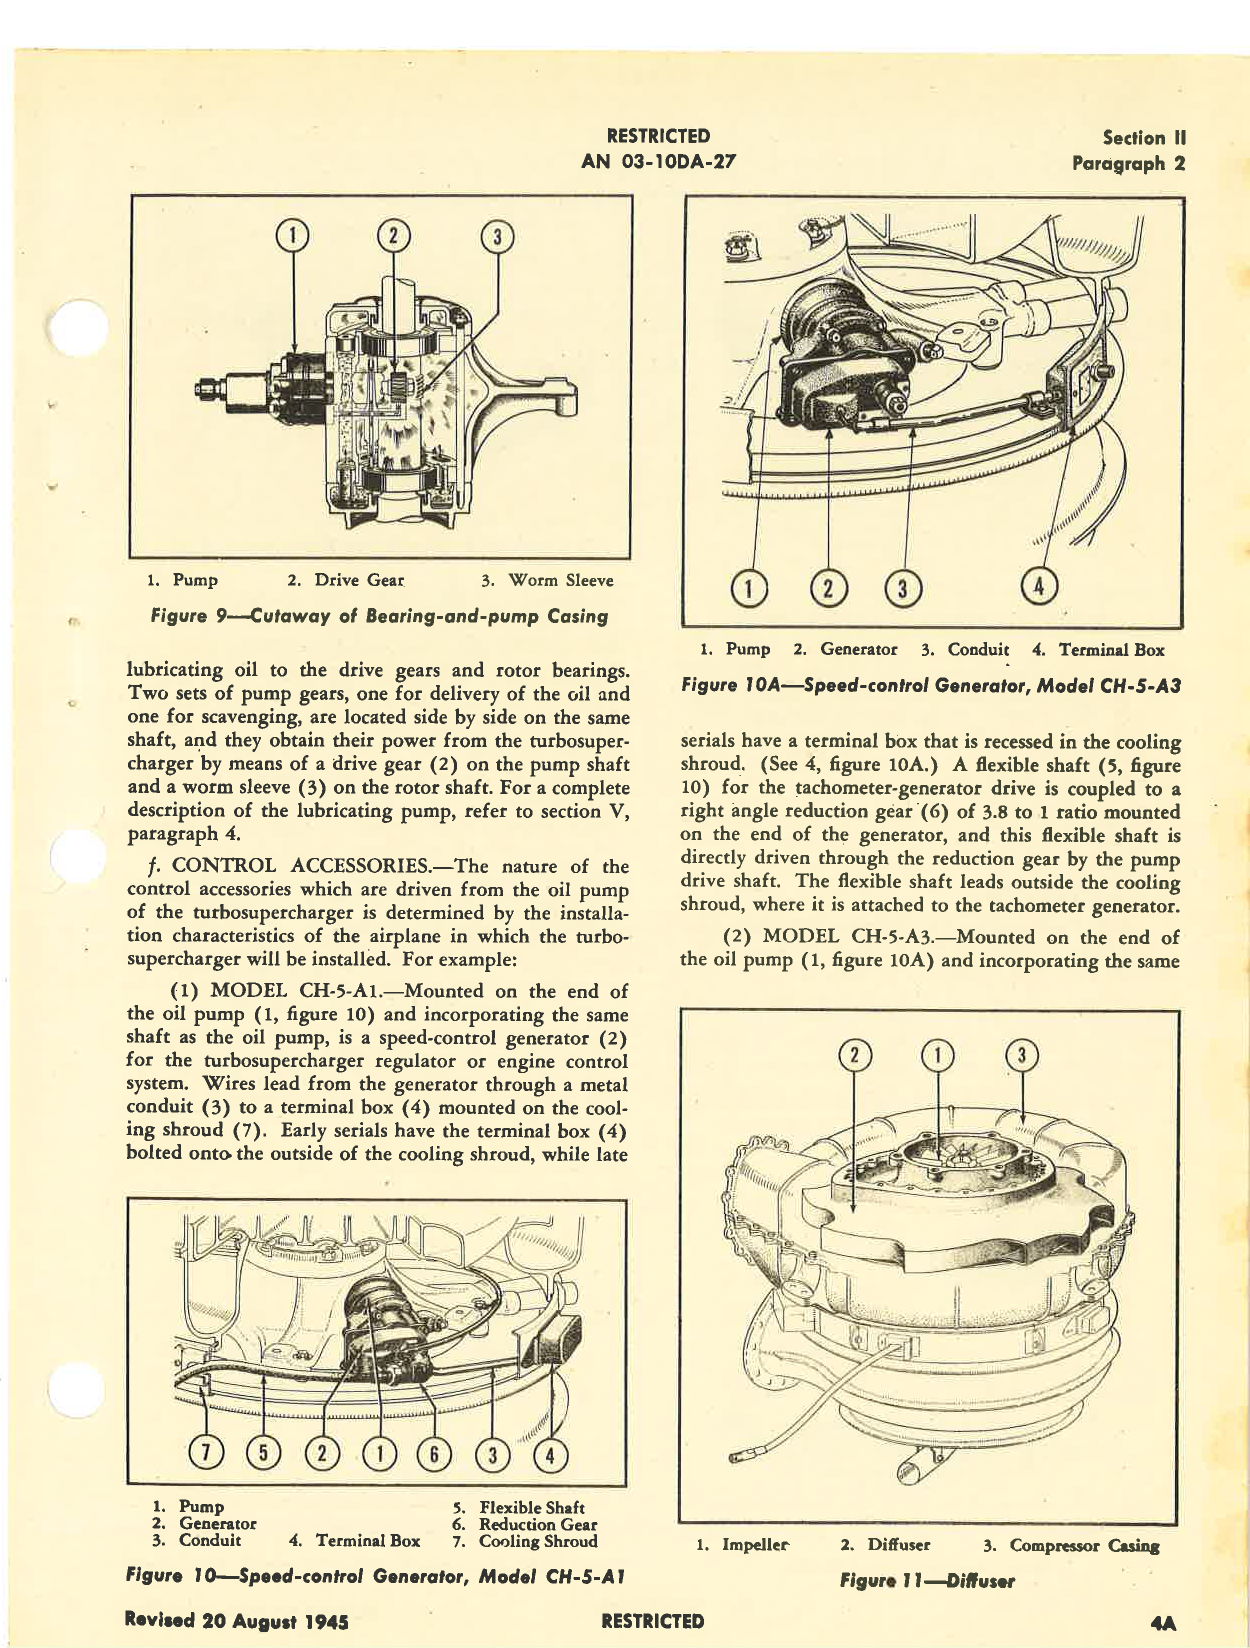 Sample page 7 from AirCorps Library document: Operation, Service, & Overhaul Instructions with Parts Catalog for Turbosuperchargers Types CH-5-A1, CH5-A3, and CH-5-B1